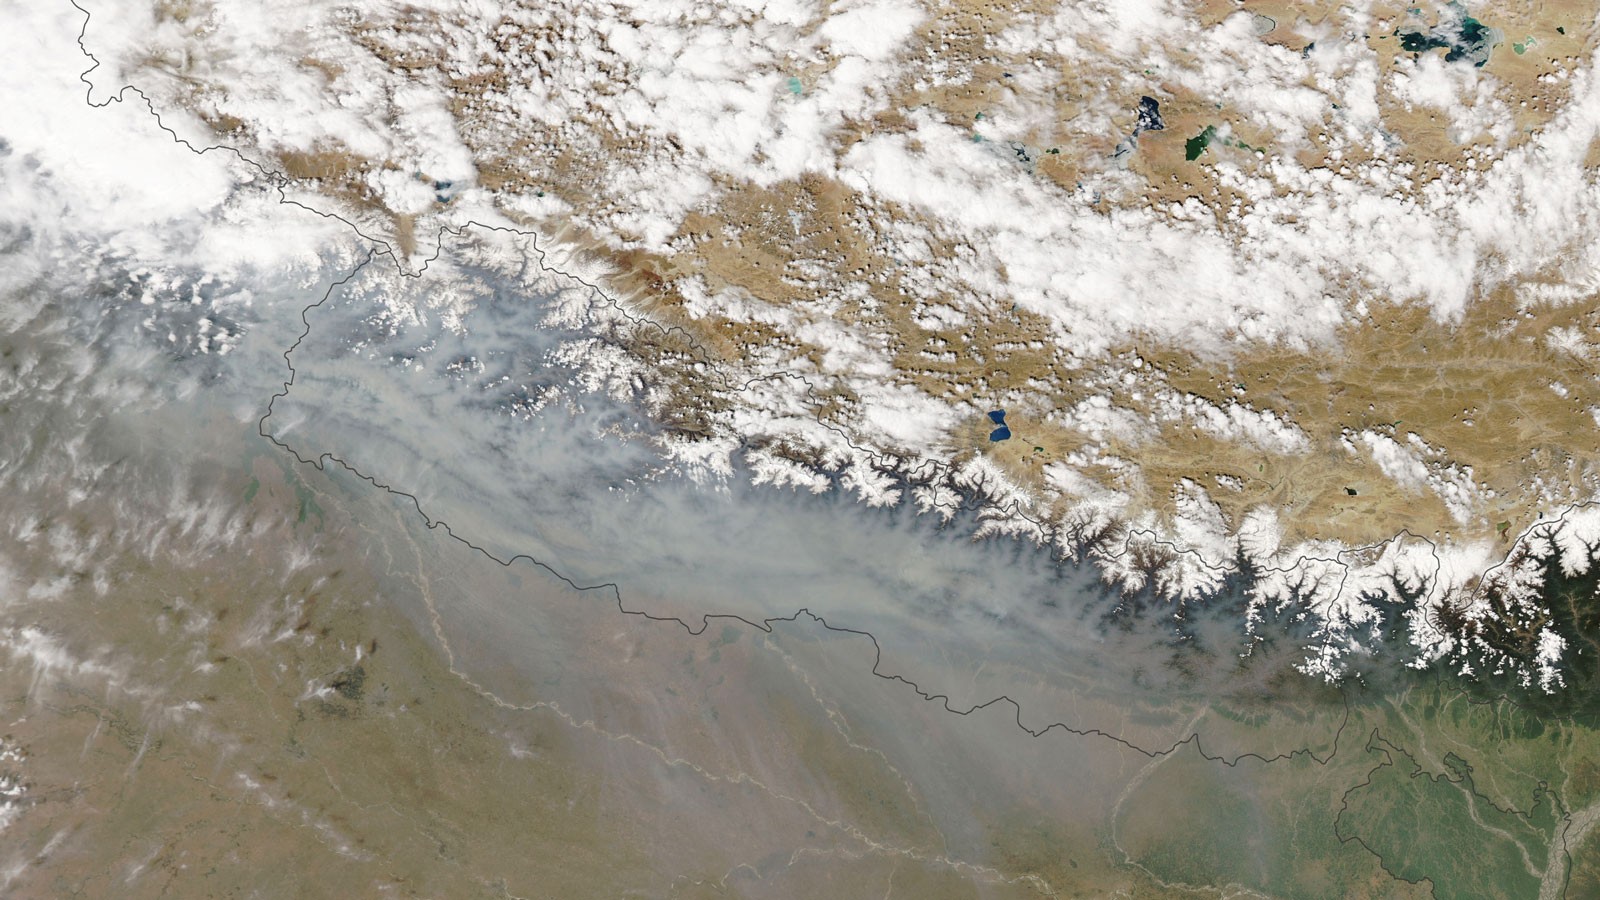 Year of intense wildfires in Nepal may help scientists predict future blazes